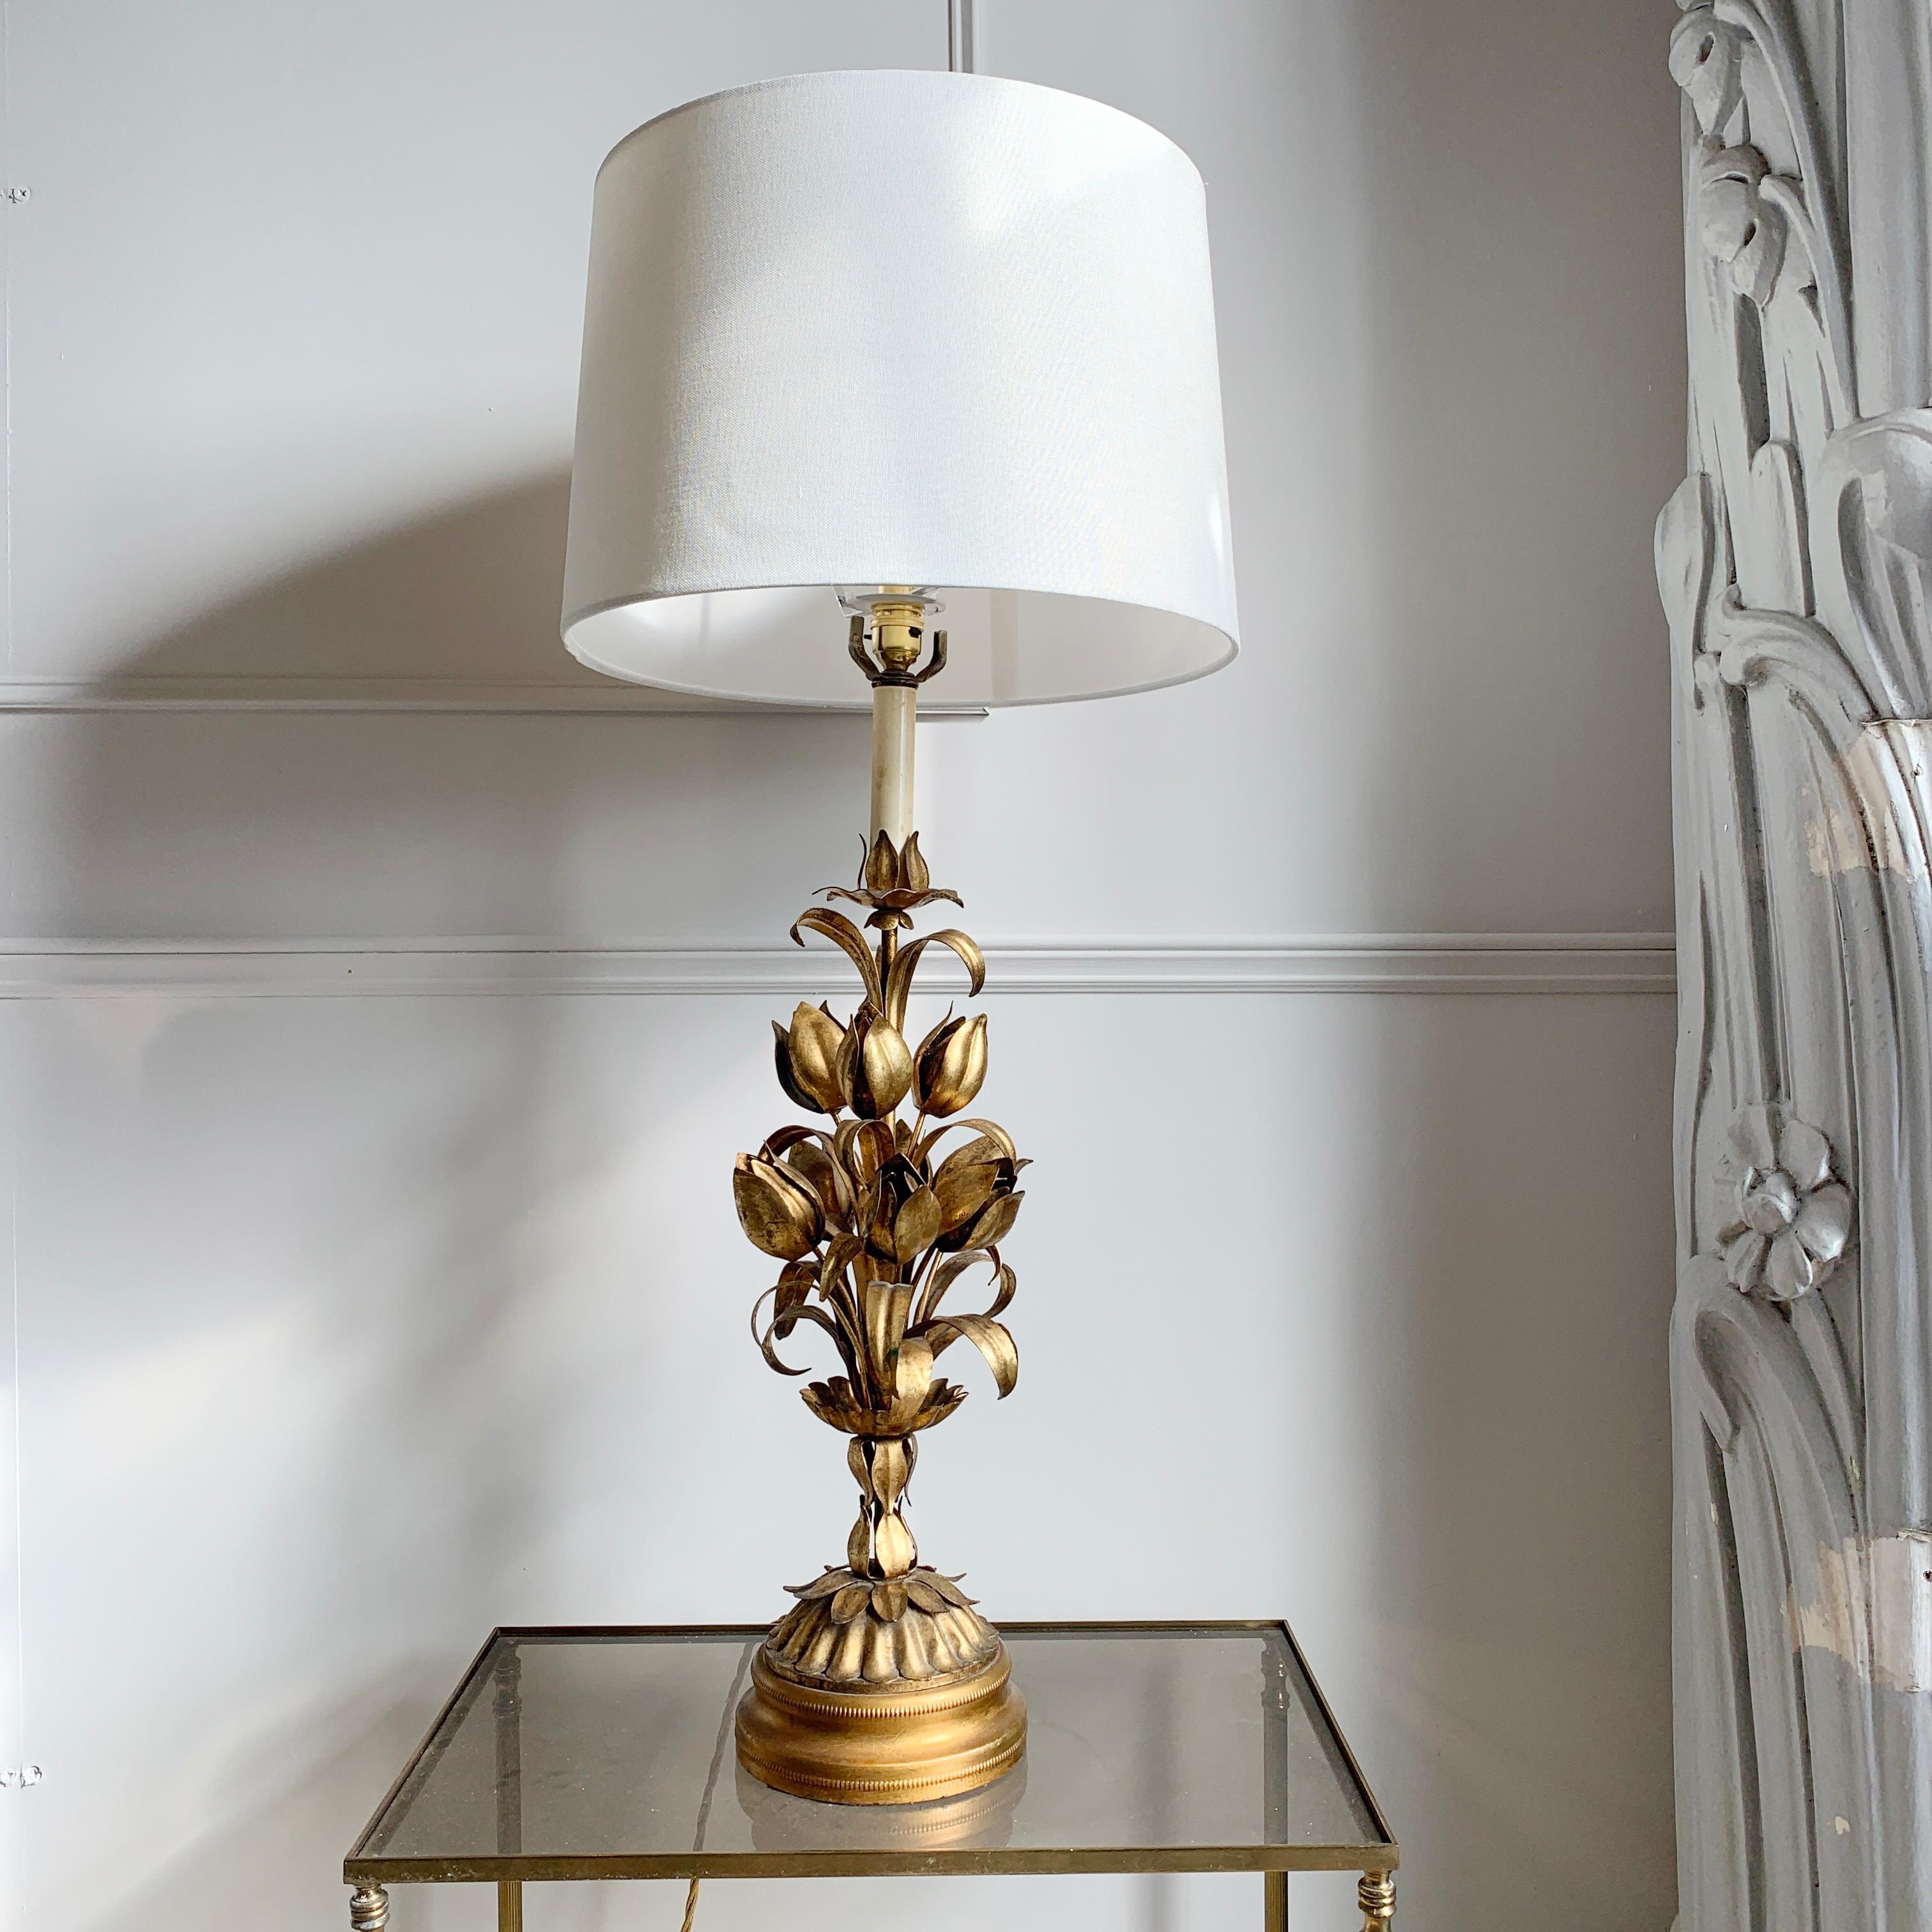 Midcentury Italian Gold Flower Table Lamp, circa 1950s For Sale 3